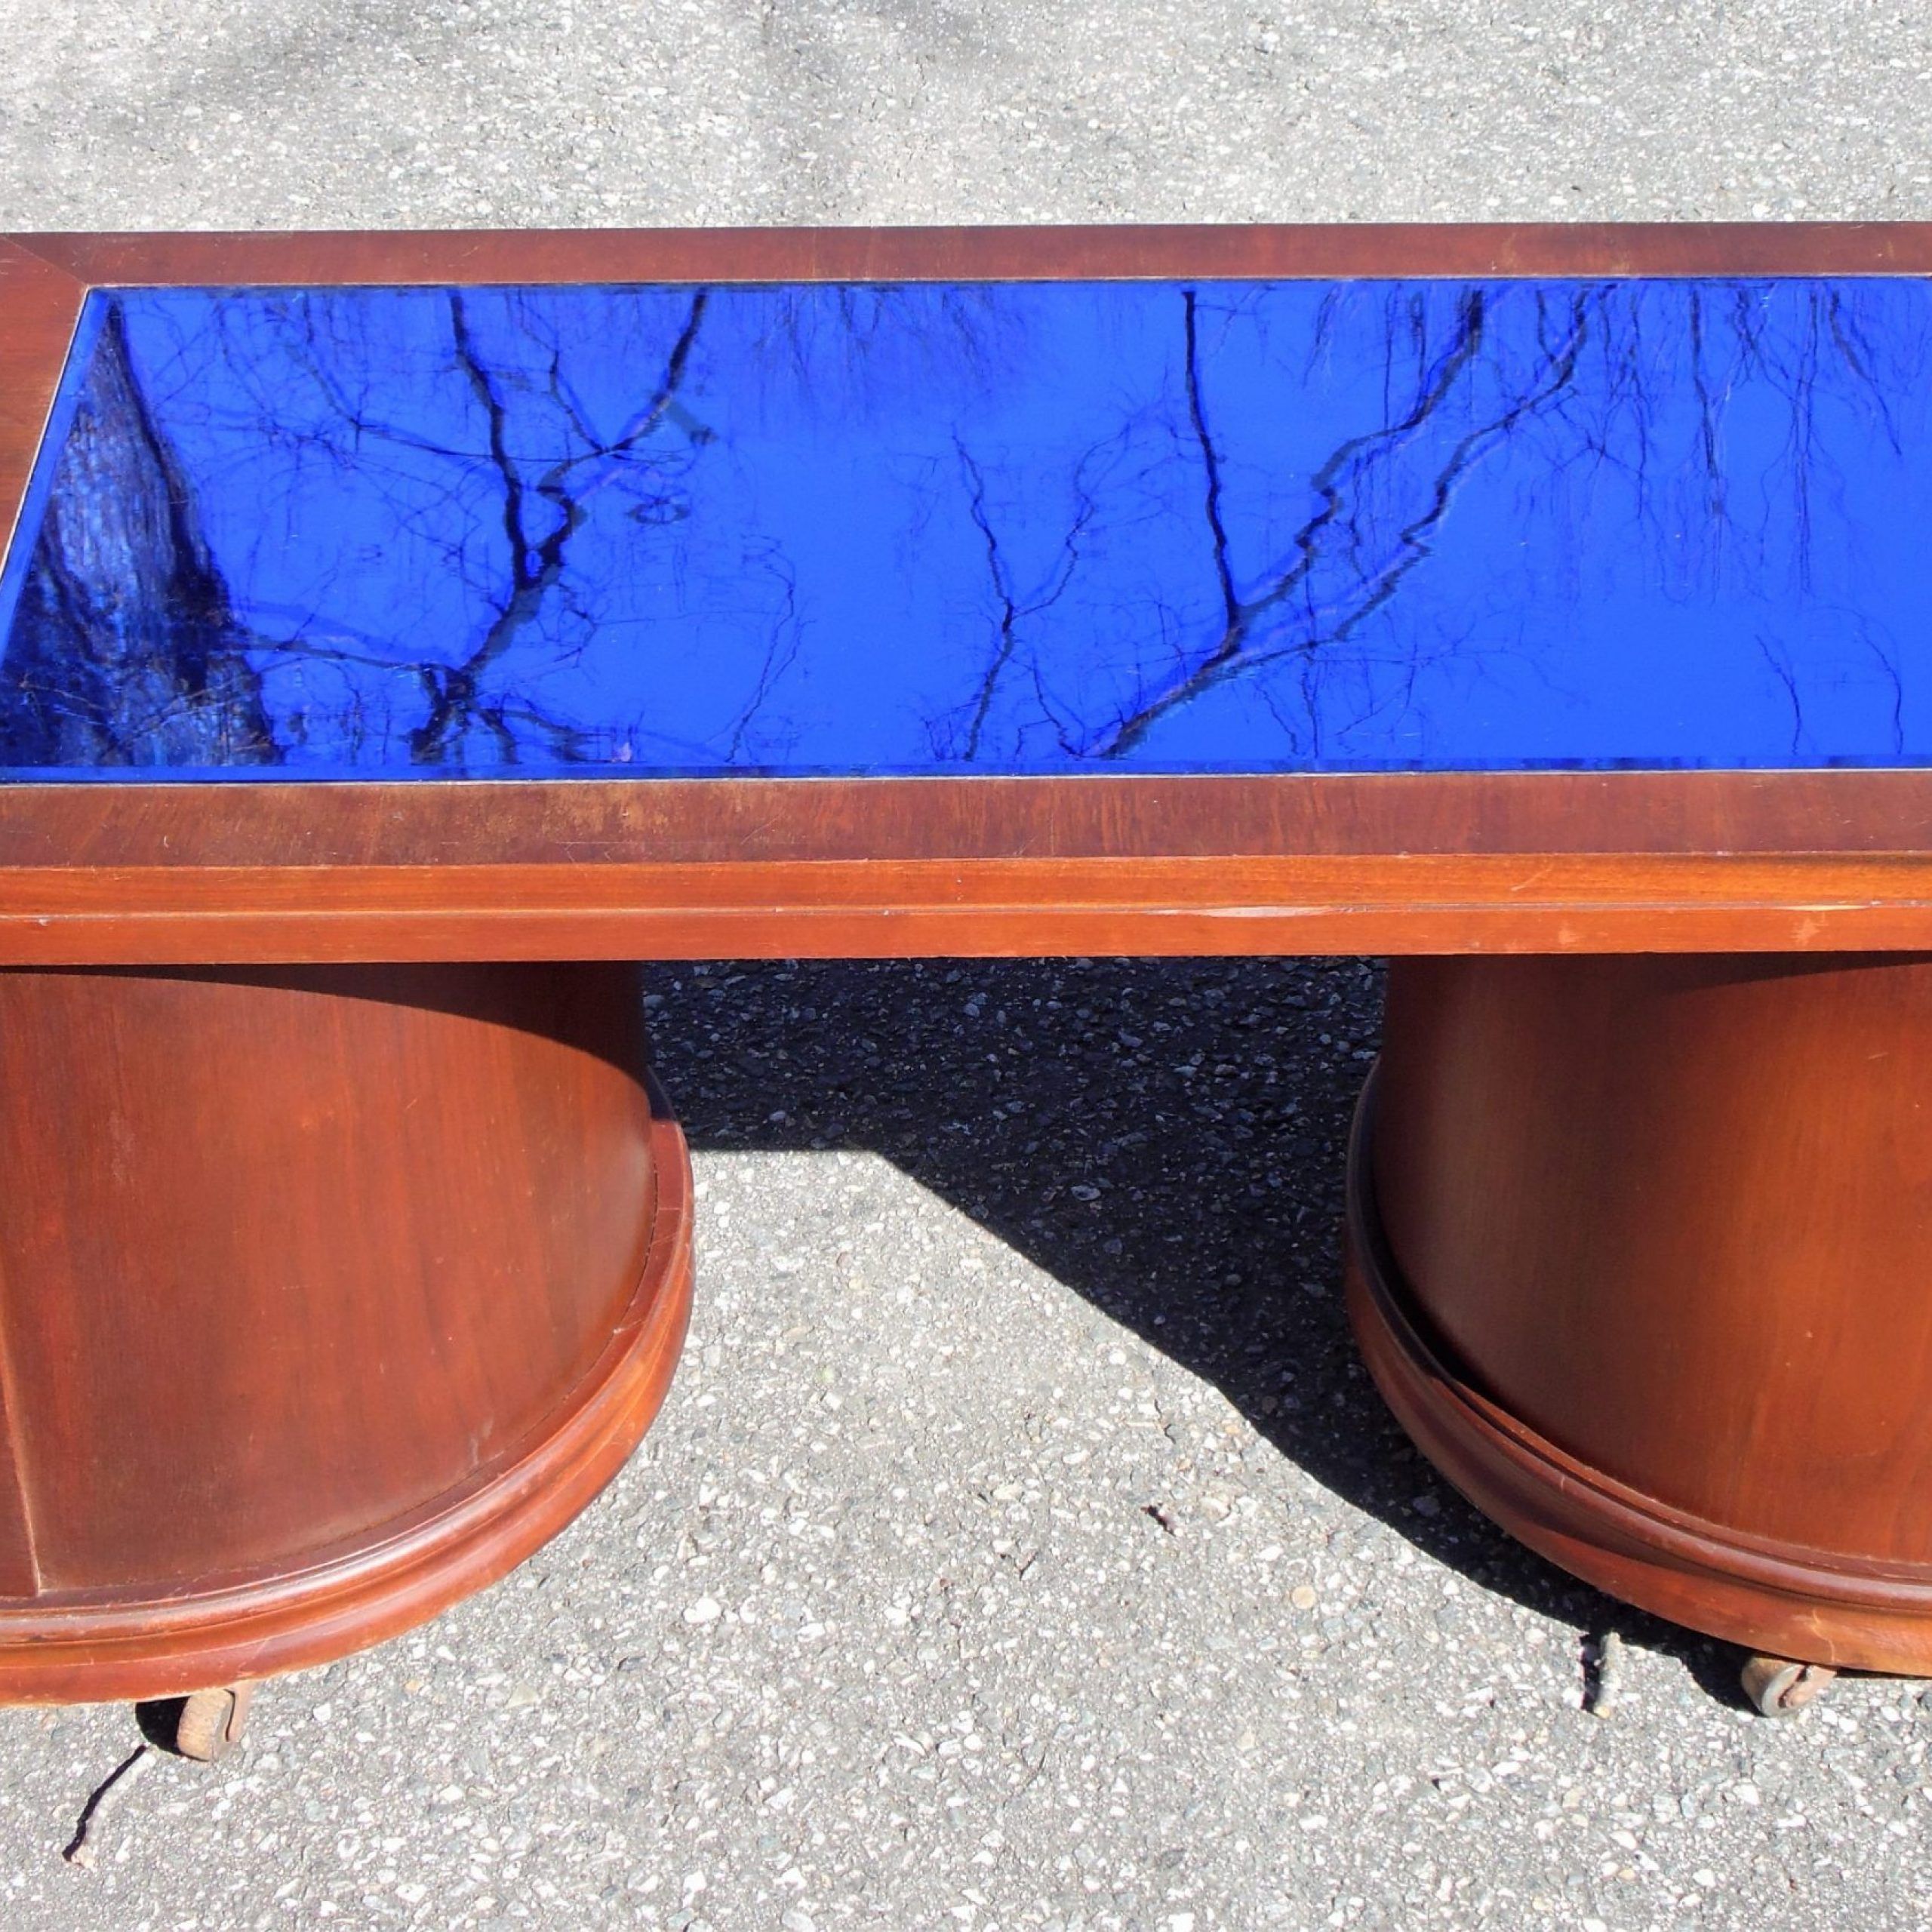 Vintage Art Deco Cobalt Blue Mirror Glass Cocktail Coffee Table With Regard To Popular Antique Mirror Cocktail Tables (View 10 of 10)